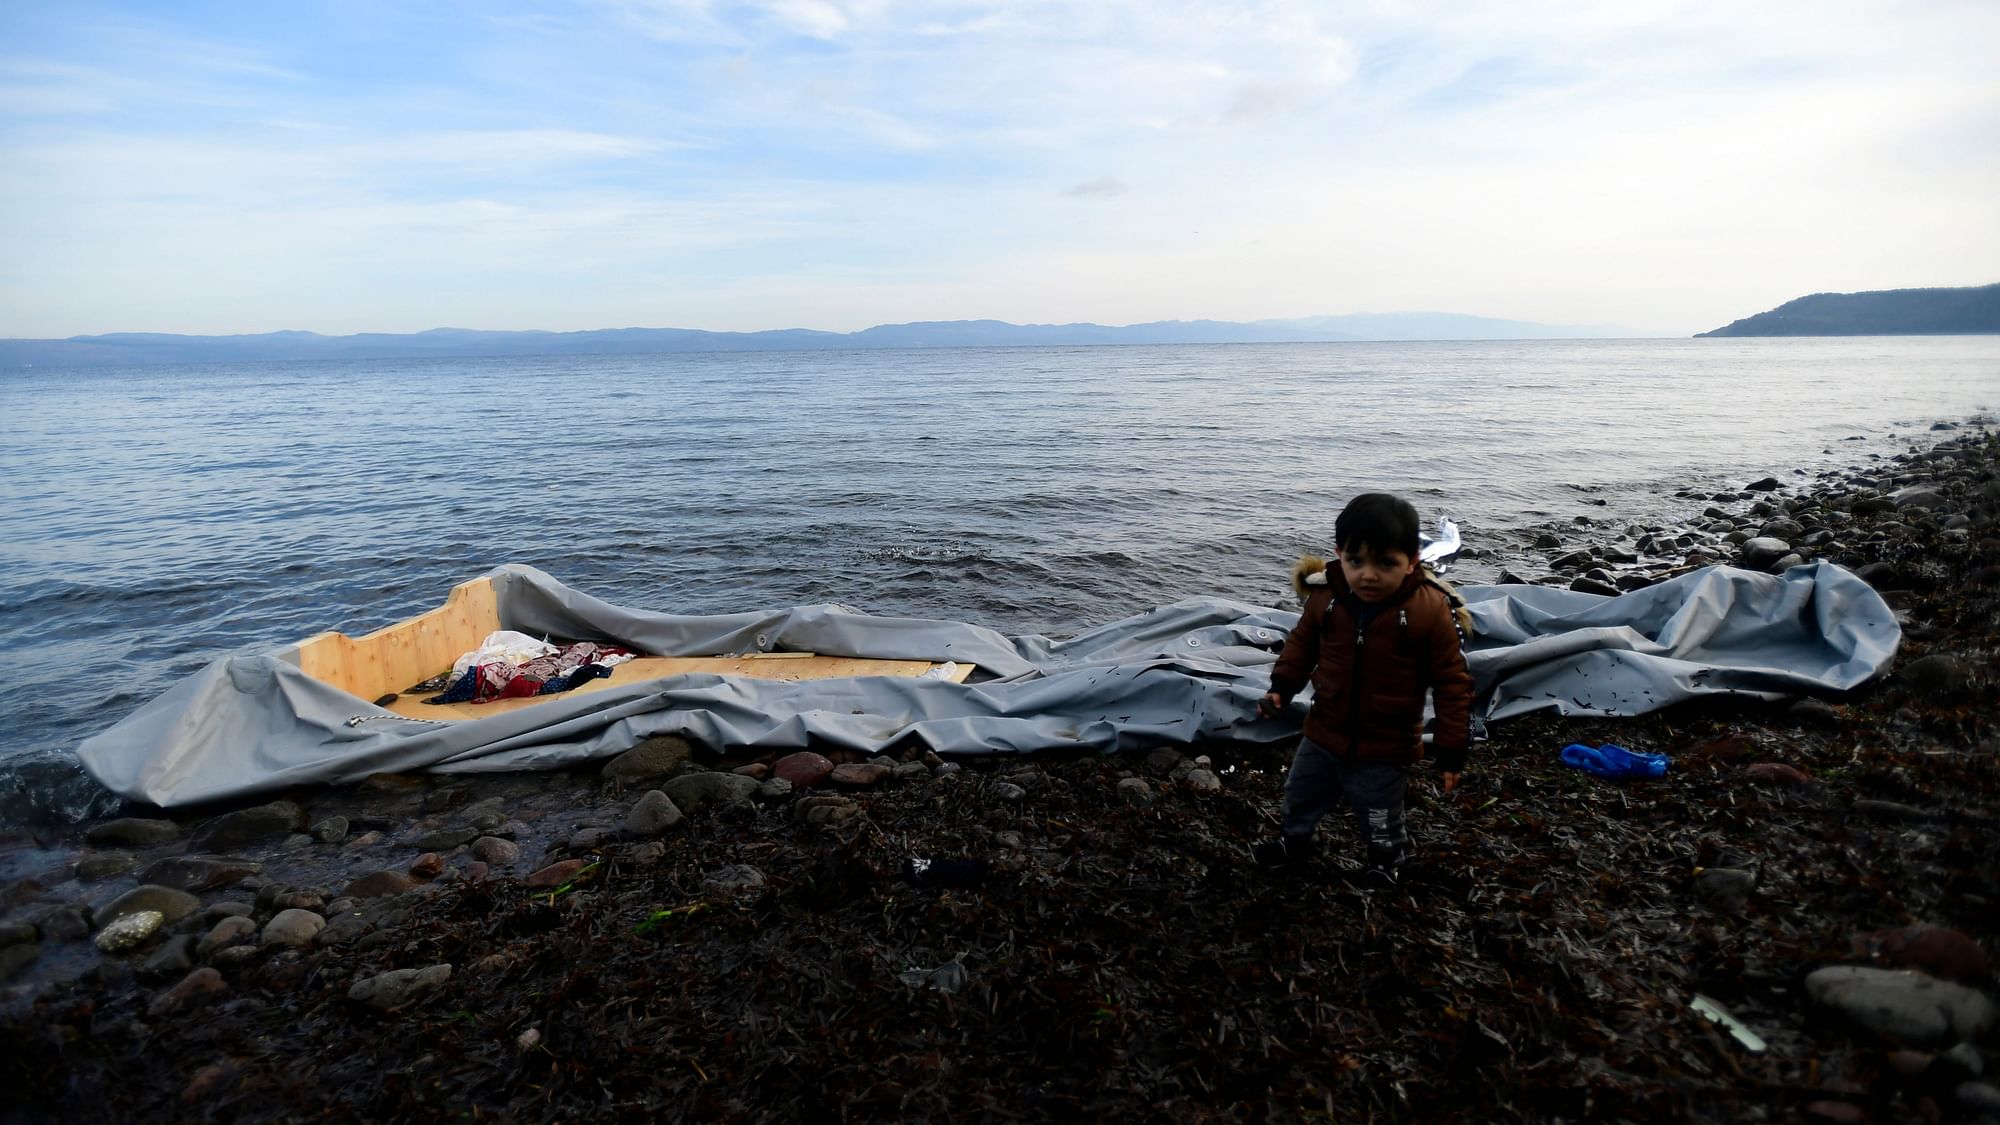 A boy stands next to a dinghy at the village of Skala Sikaminias, on the Greek island of Lesbos, after crossing with other migrants the Aegean sea from Turkey, Sunday, 1 March.&nbsp;&nbsp;